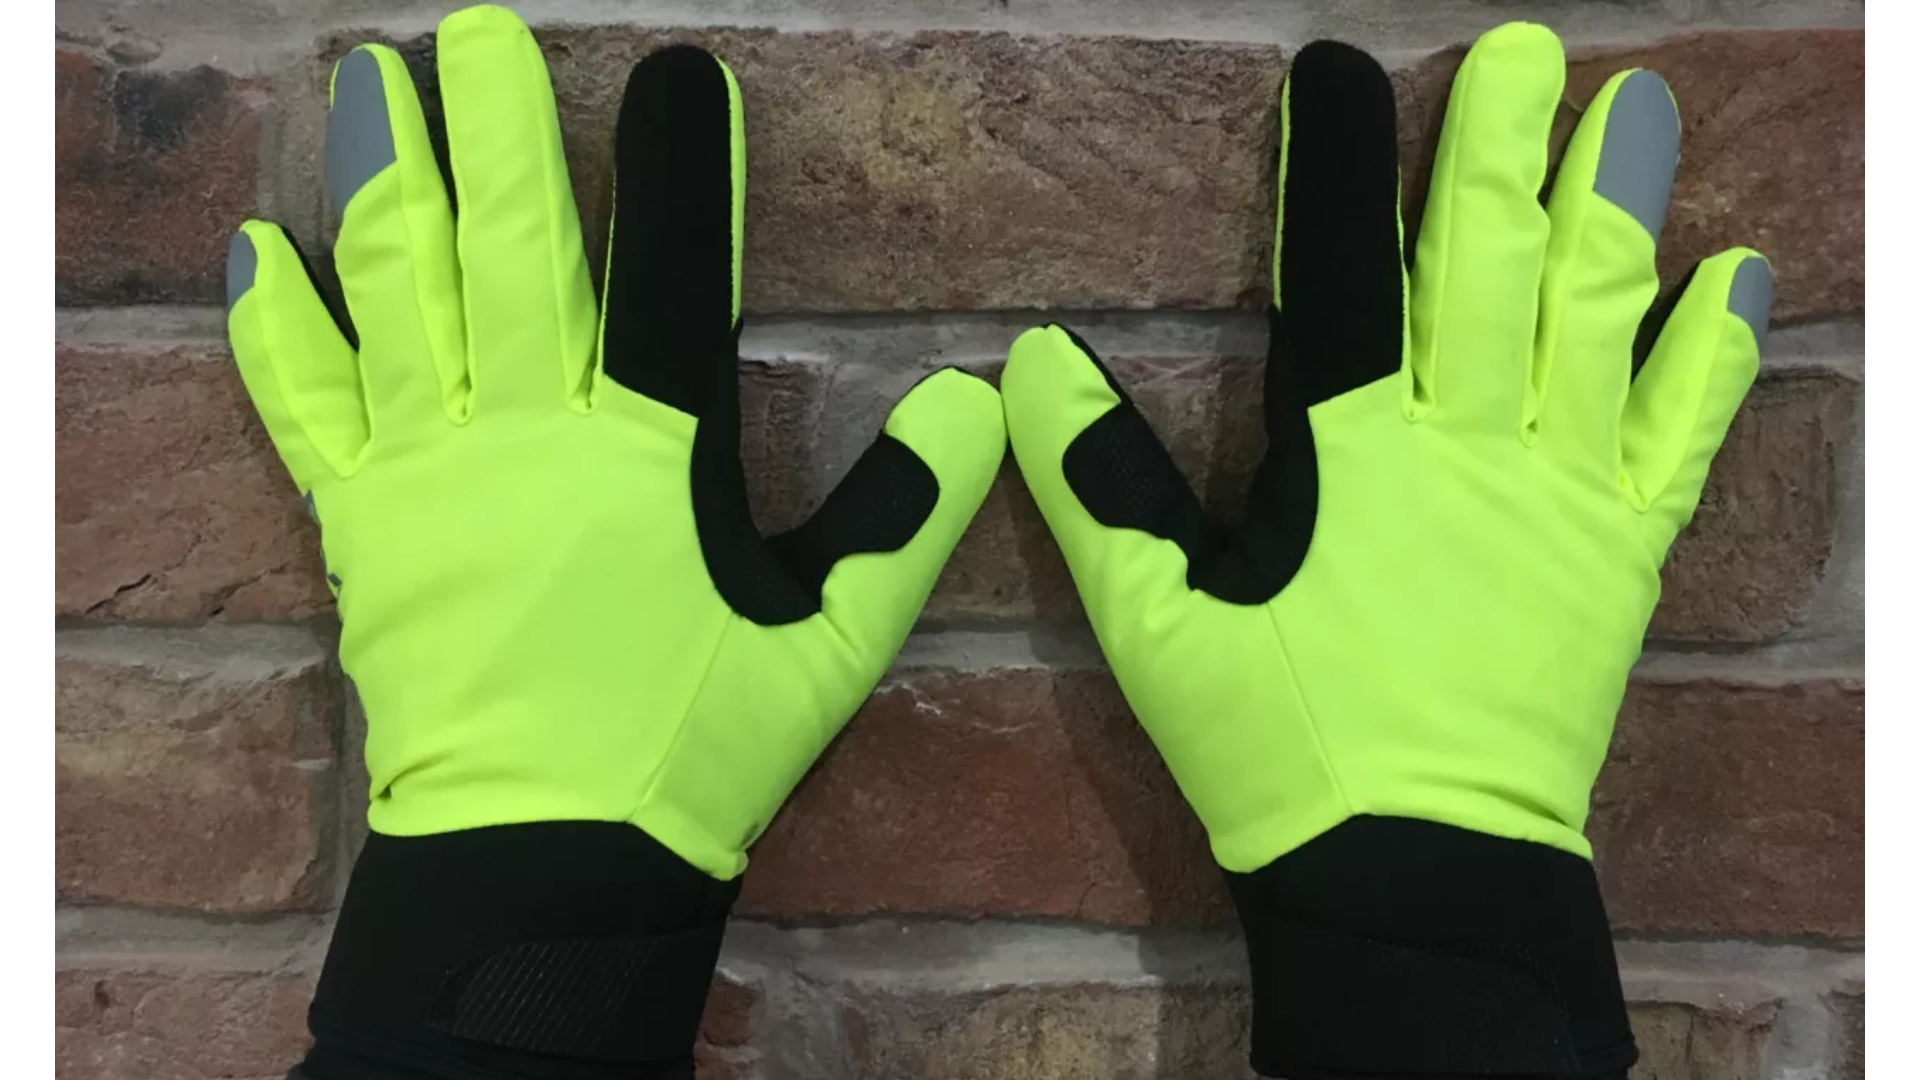 Endura Strike gloves are shown on hands held up against a brick wall and are a great winter cycling glove for affordability